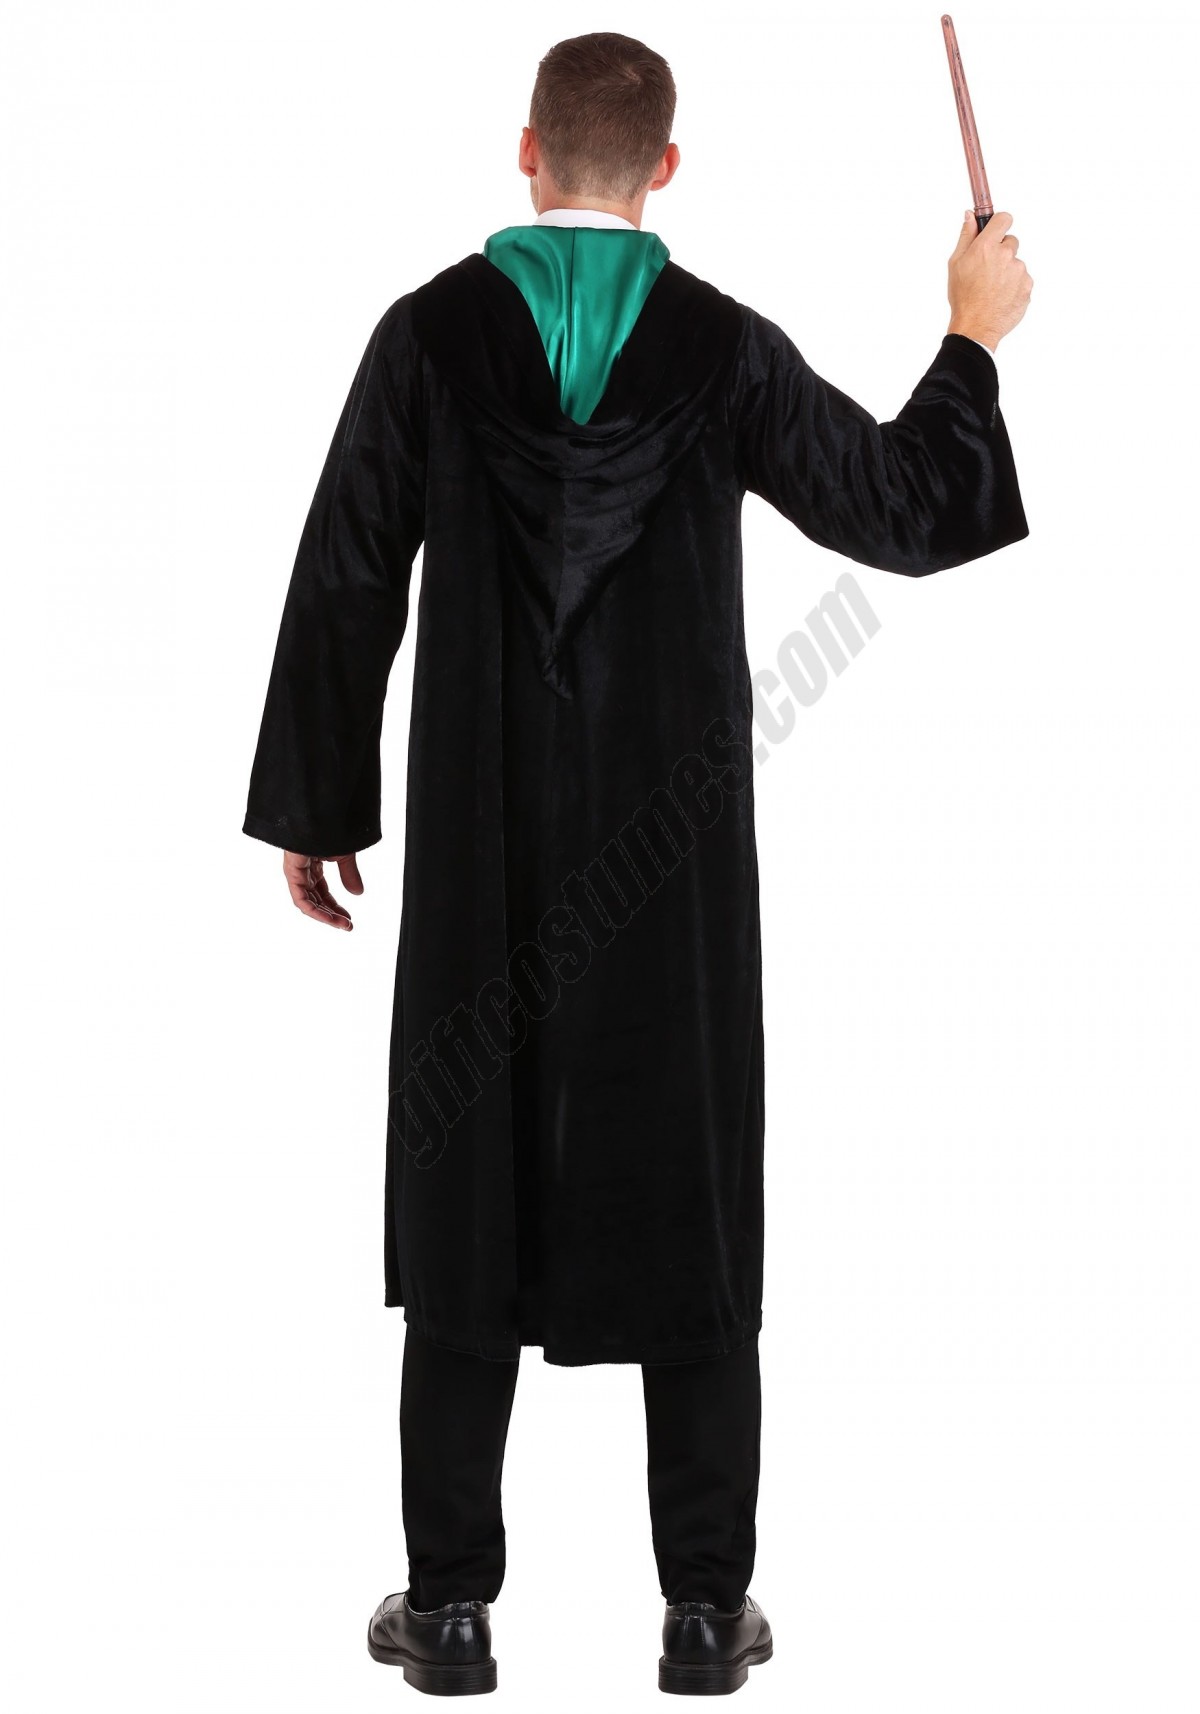 Harry Potter Deluxe Slytherin Robe Costume for Adults - Men's - -1